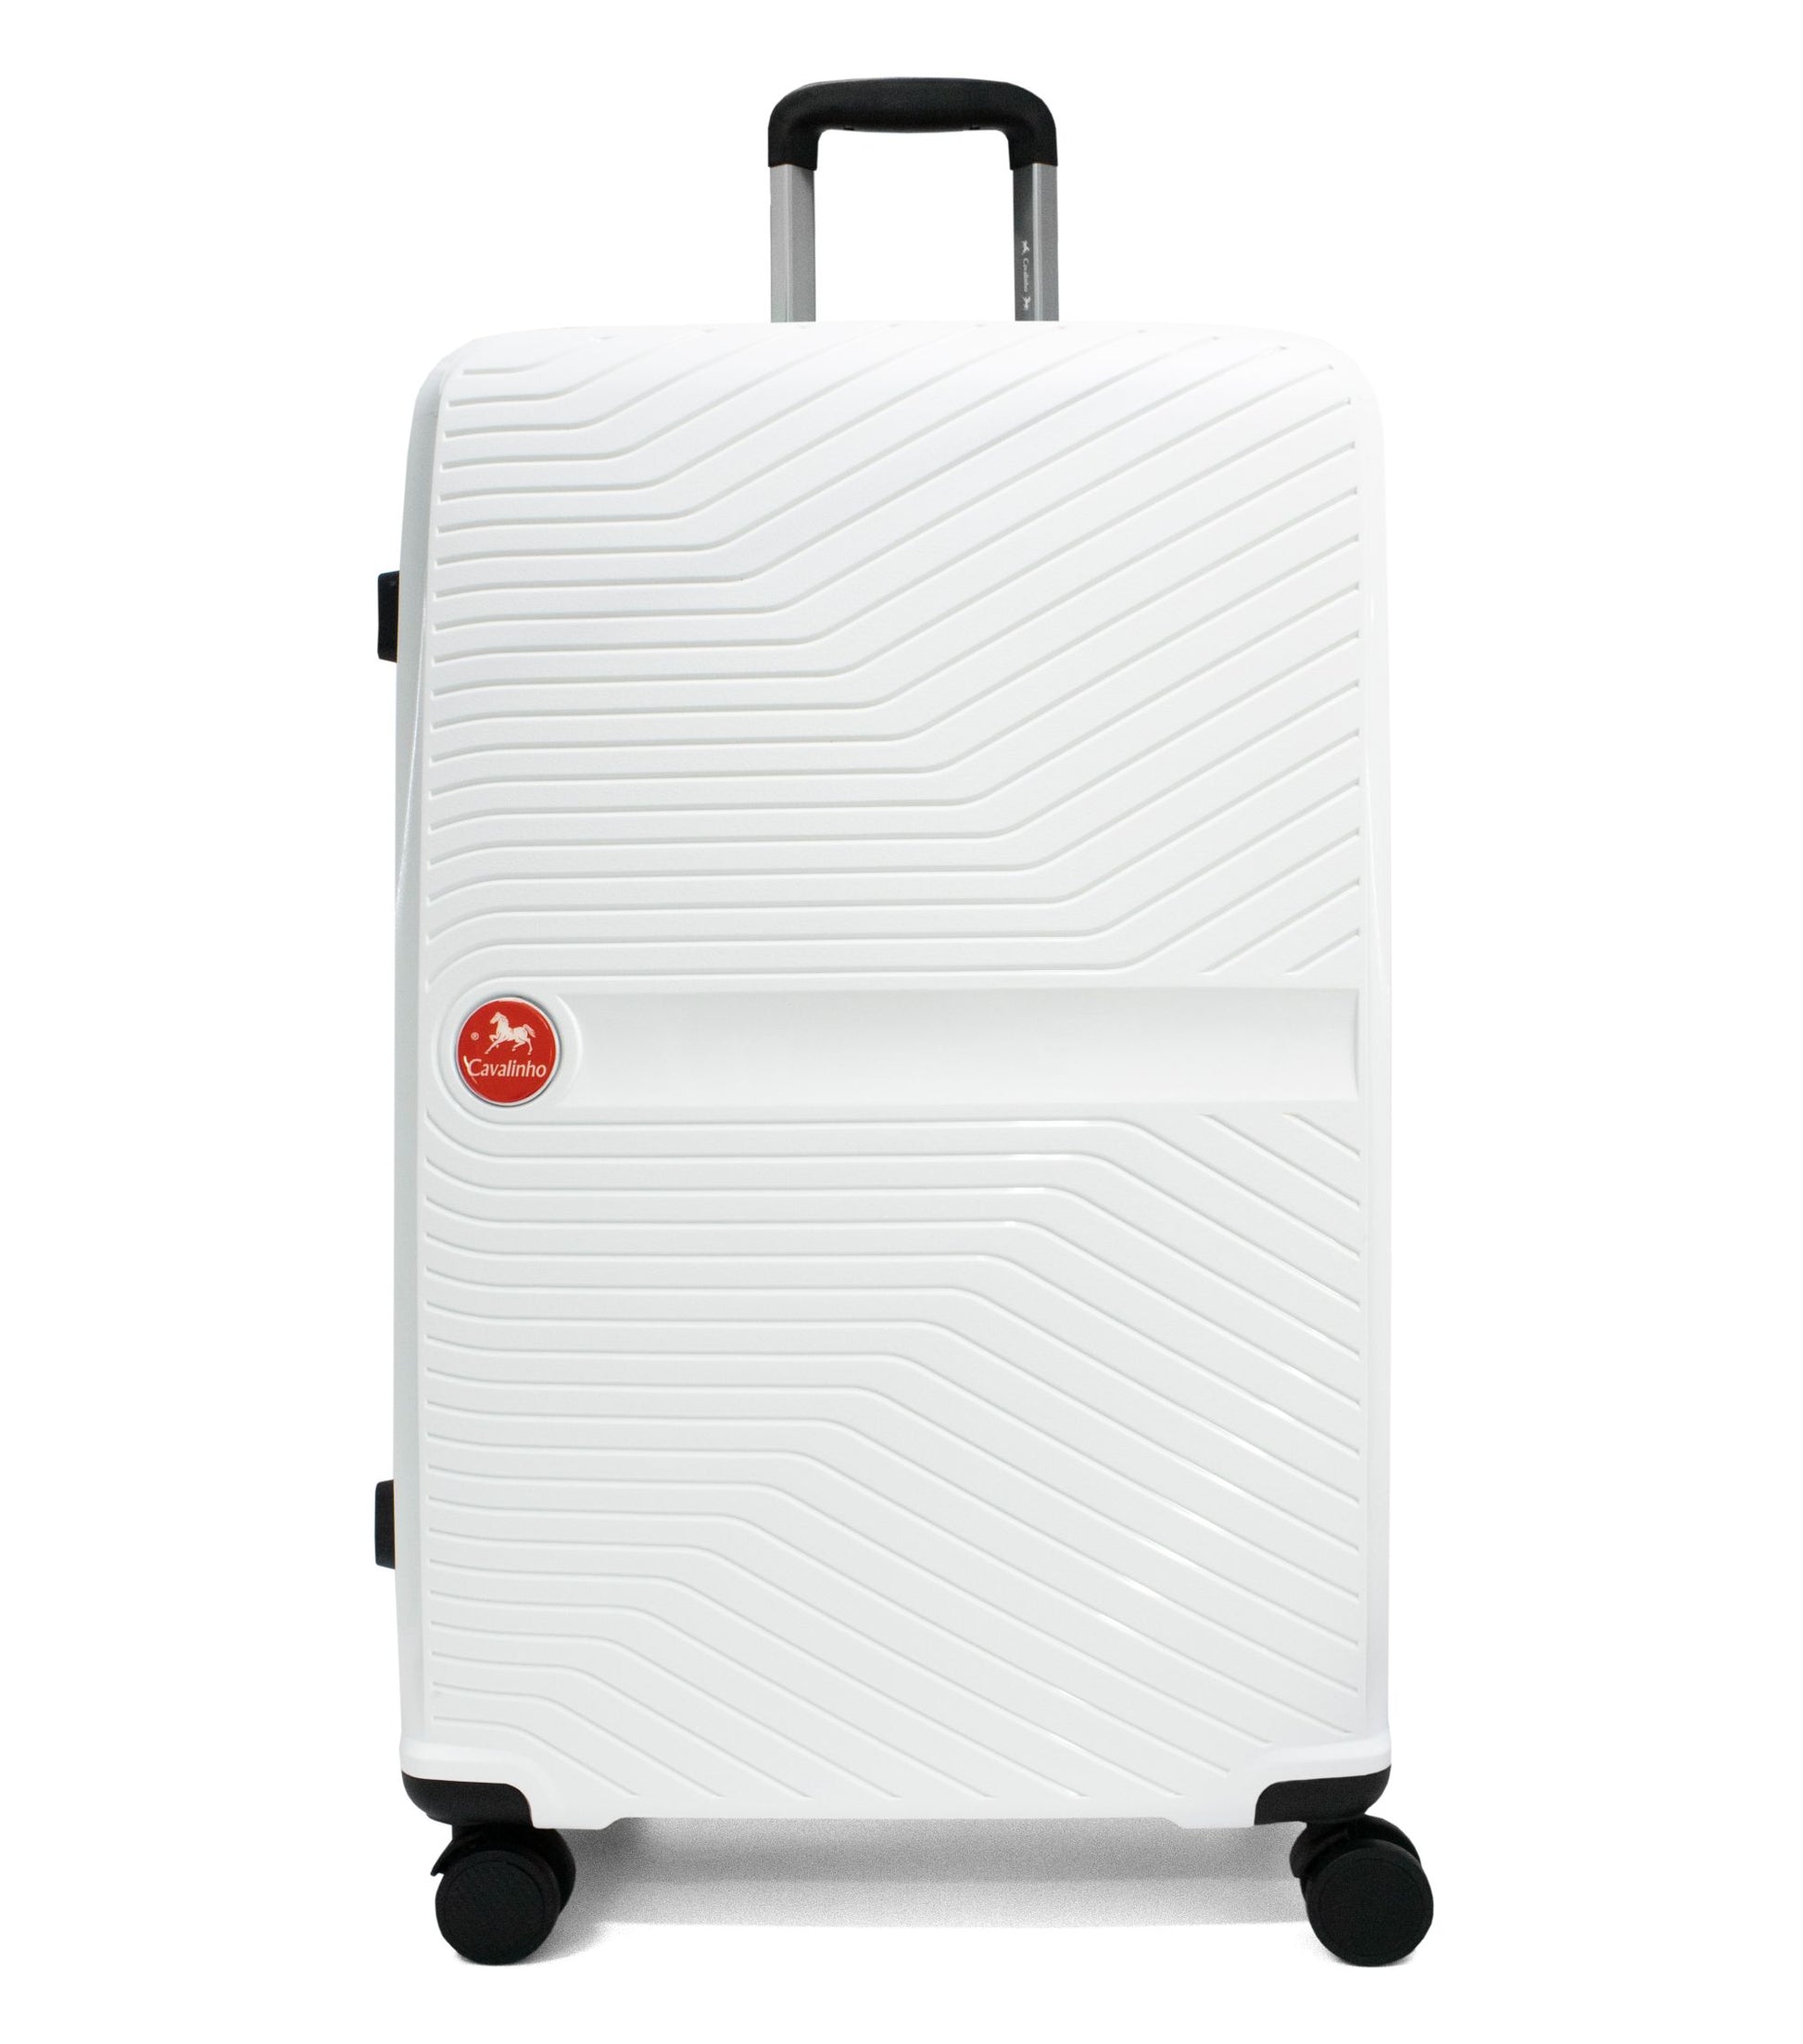 Cavalinho Colorful Check-in Hardside Luggage (28") - 28 inch White - 68020004.06.28_1